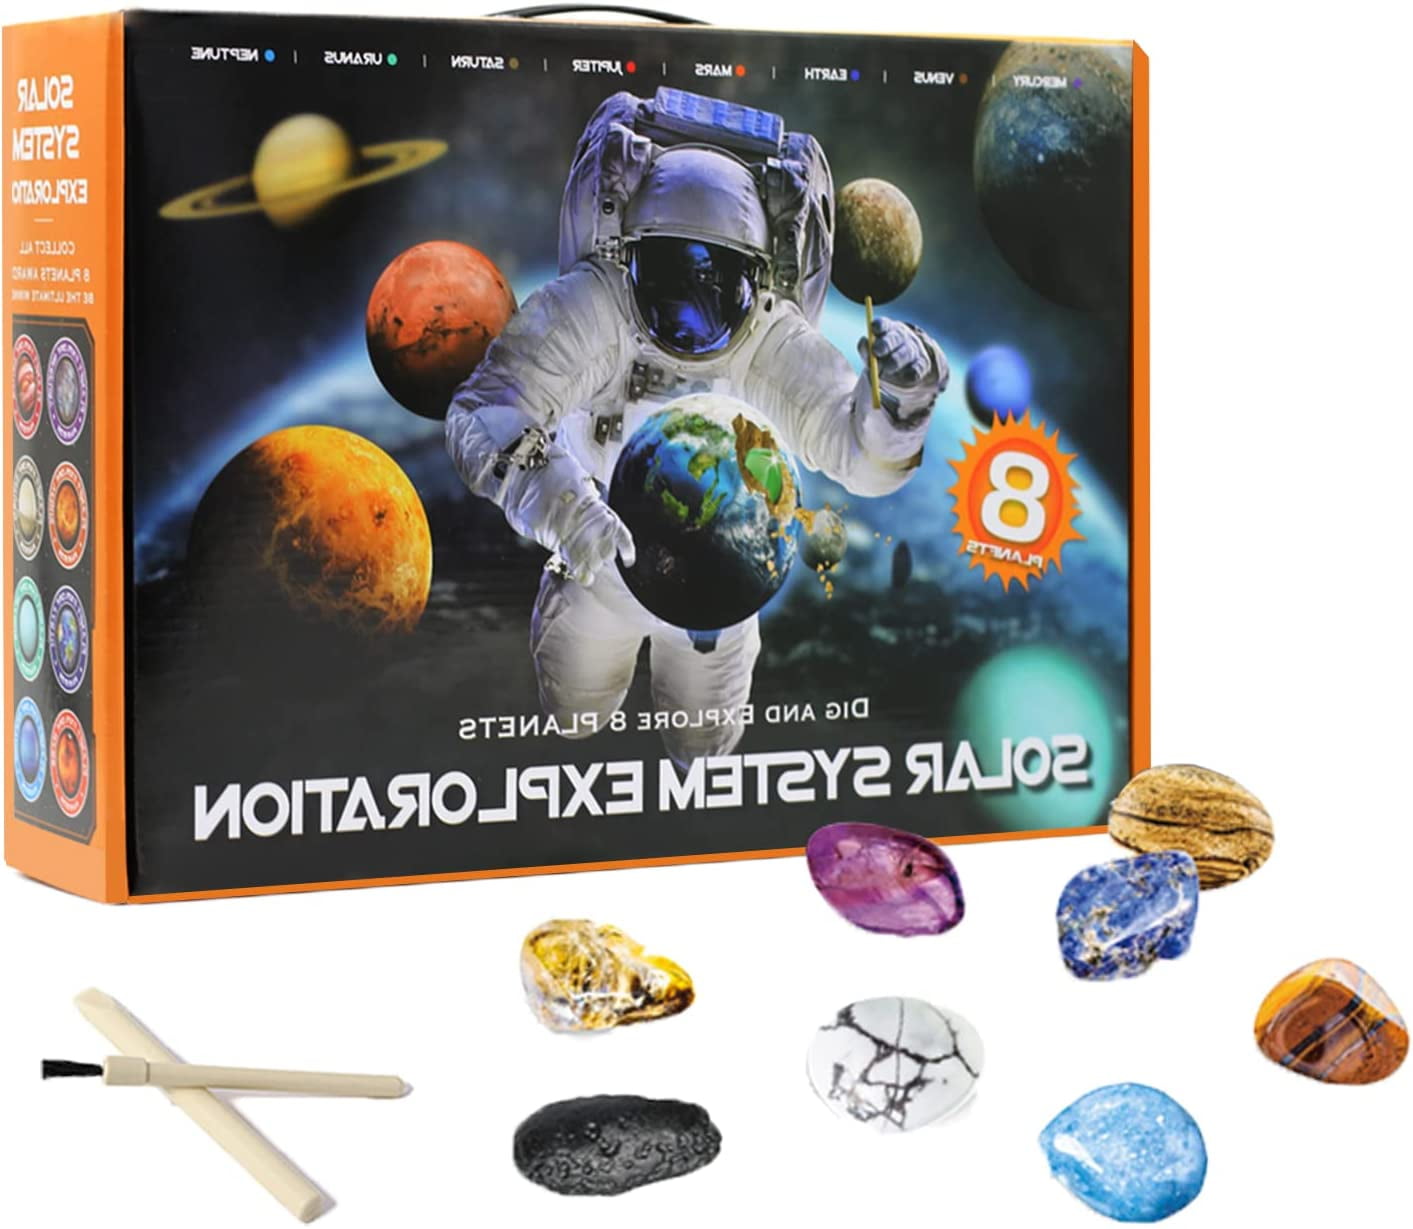  Geology Toys For Kids